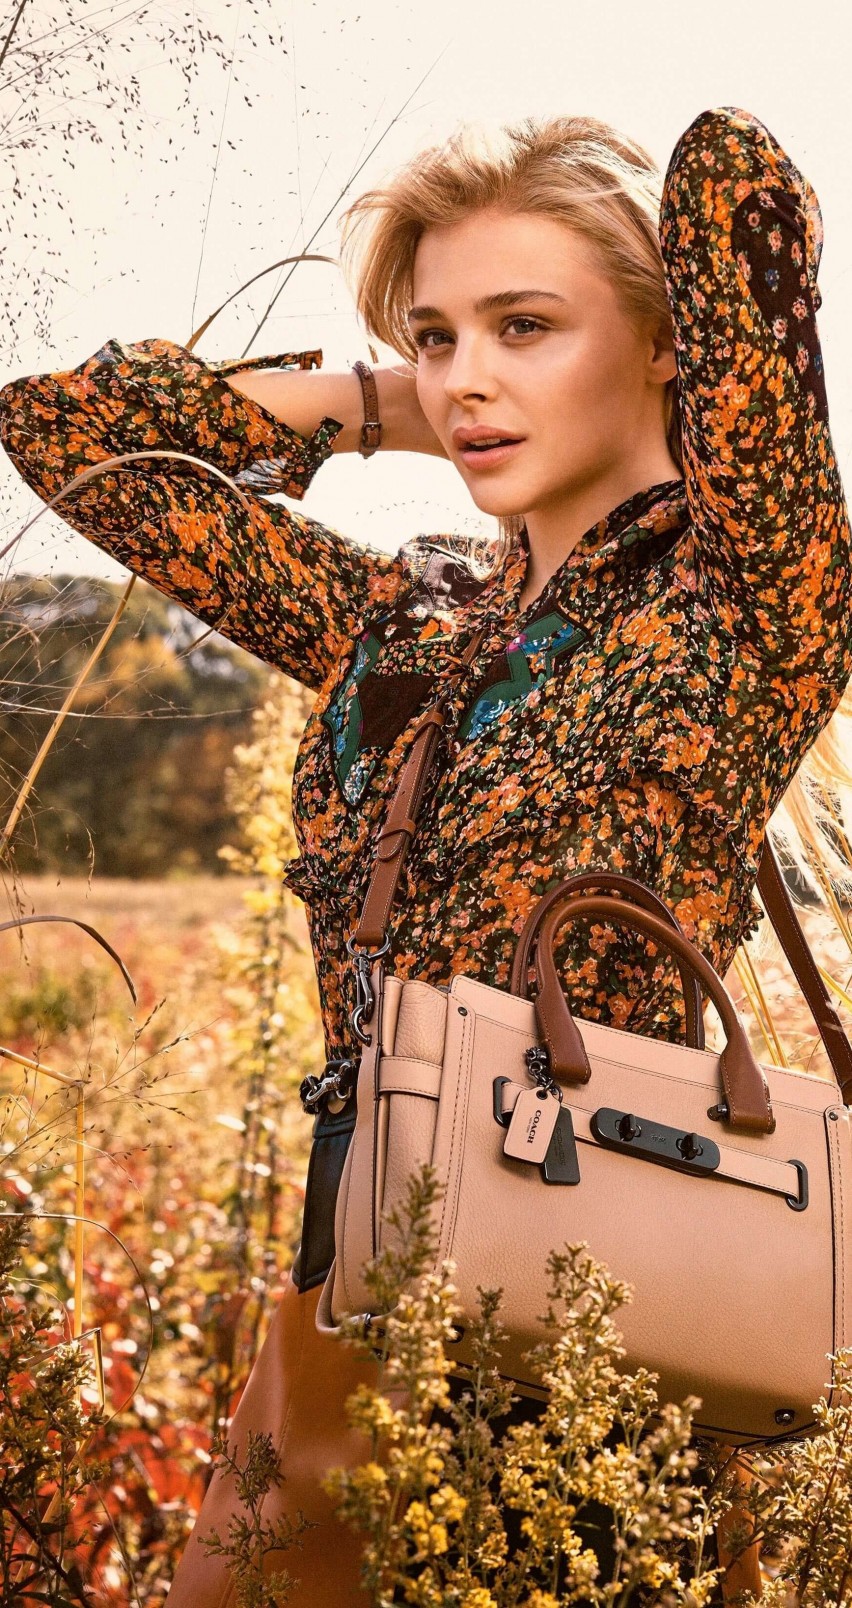 Chloe Moretz Coach Spring 2016 Campaign Wallpaper for Apple iPhone 6 / 6s